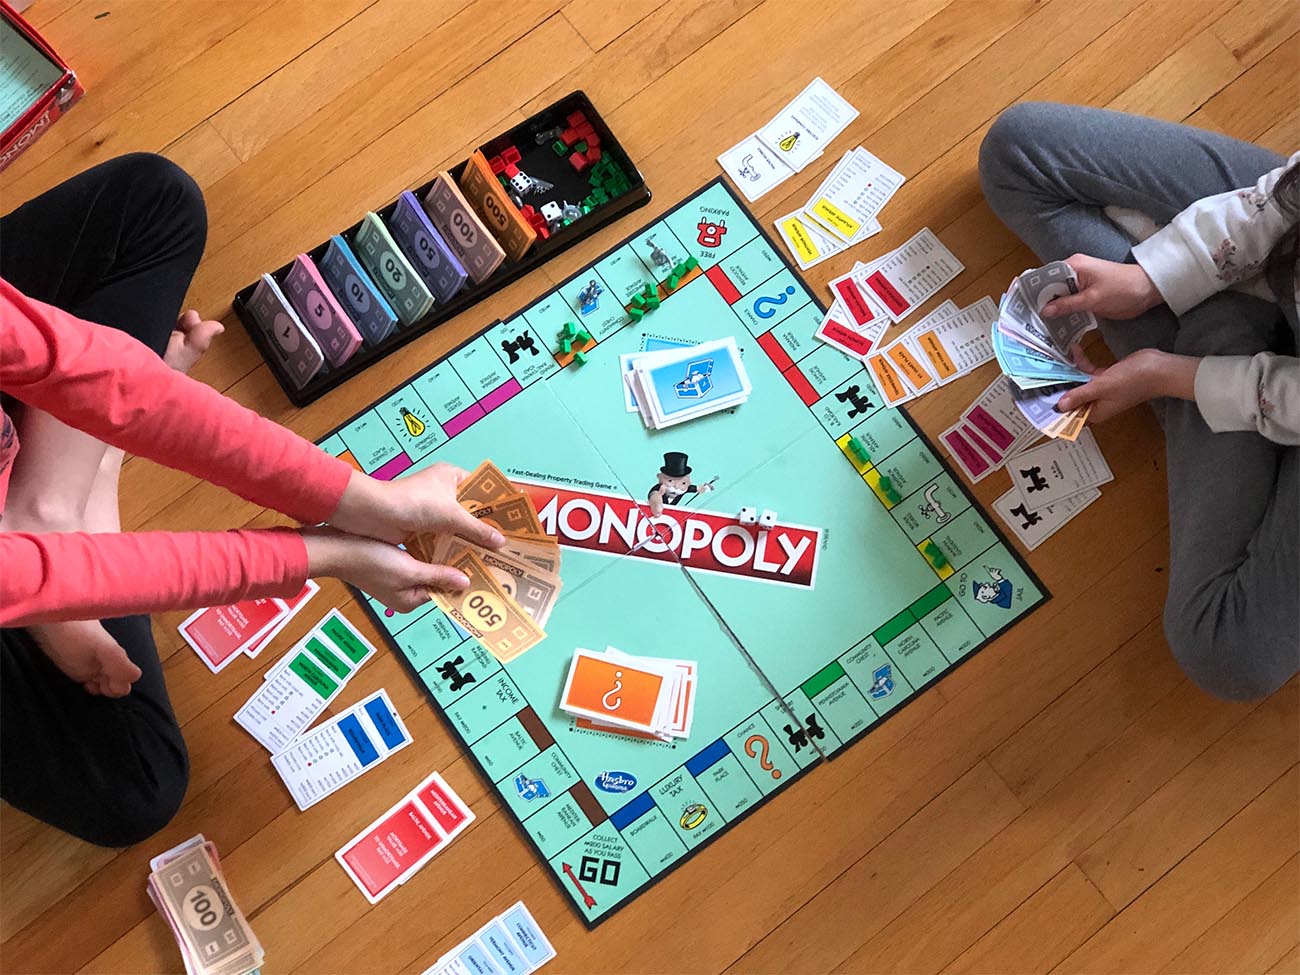 two children playing monopoly on the floor